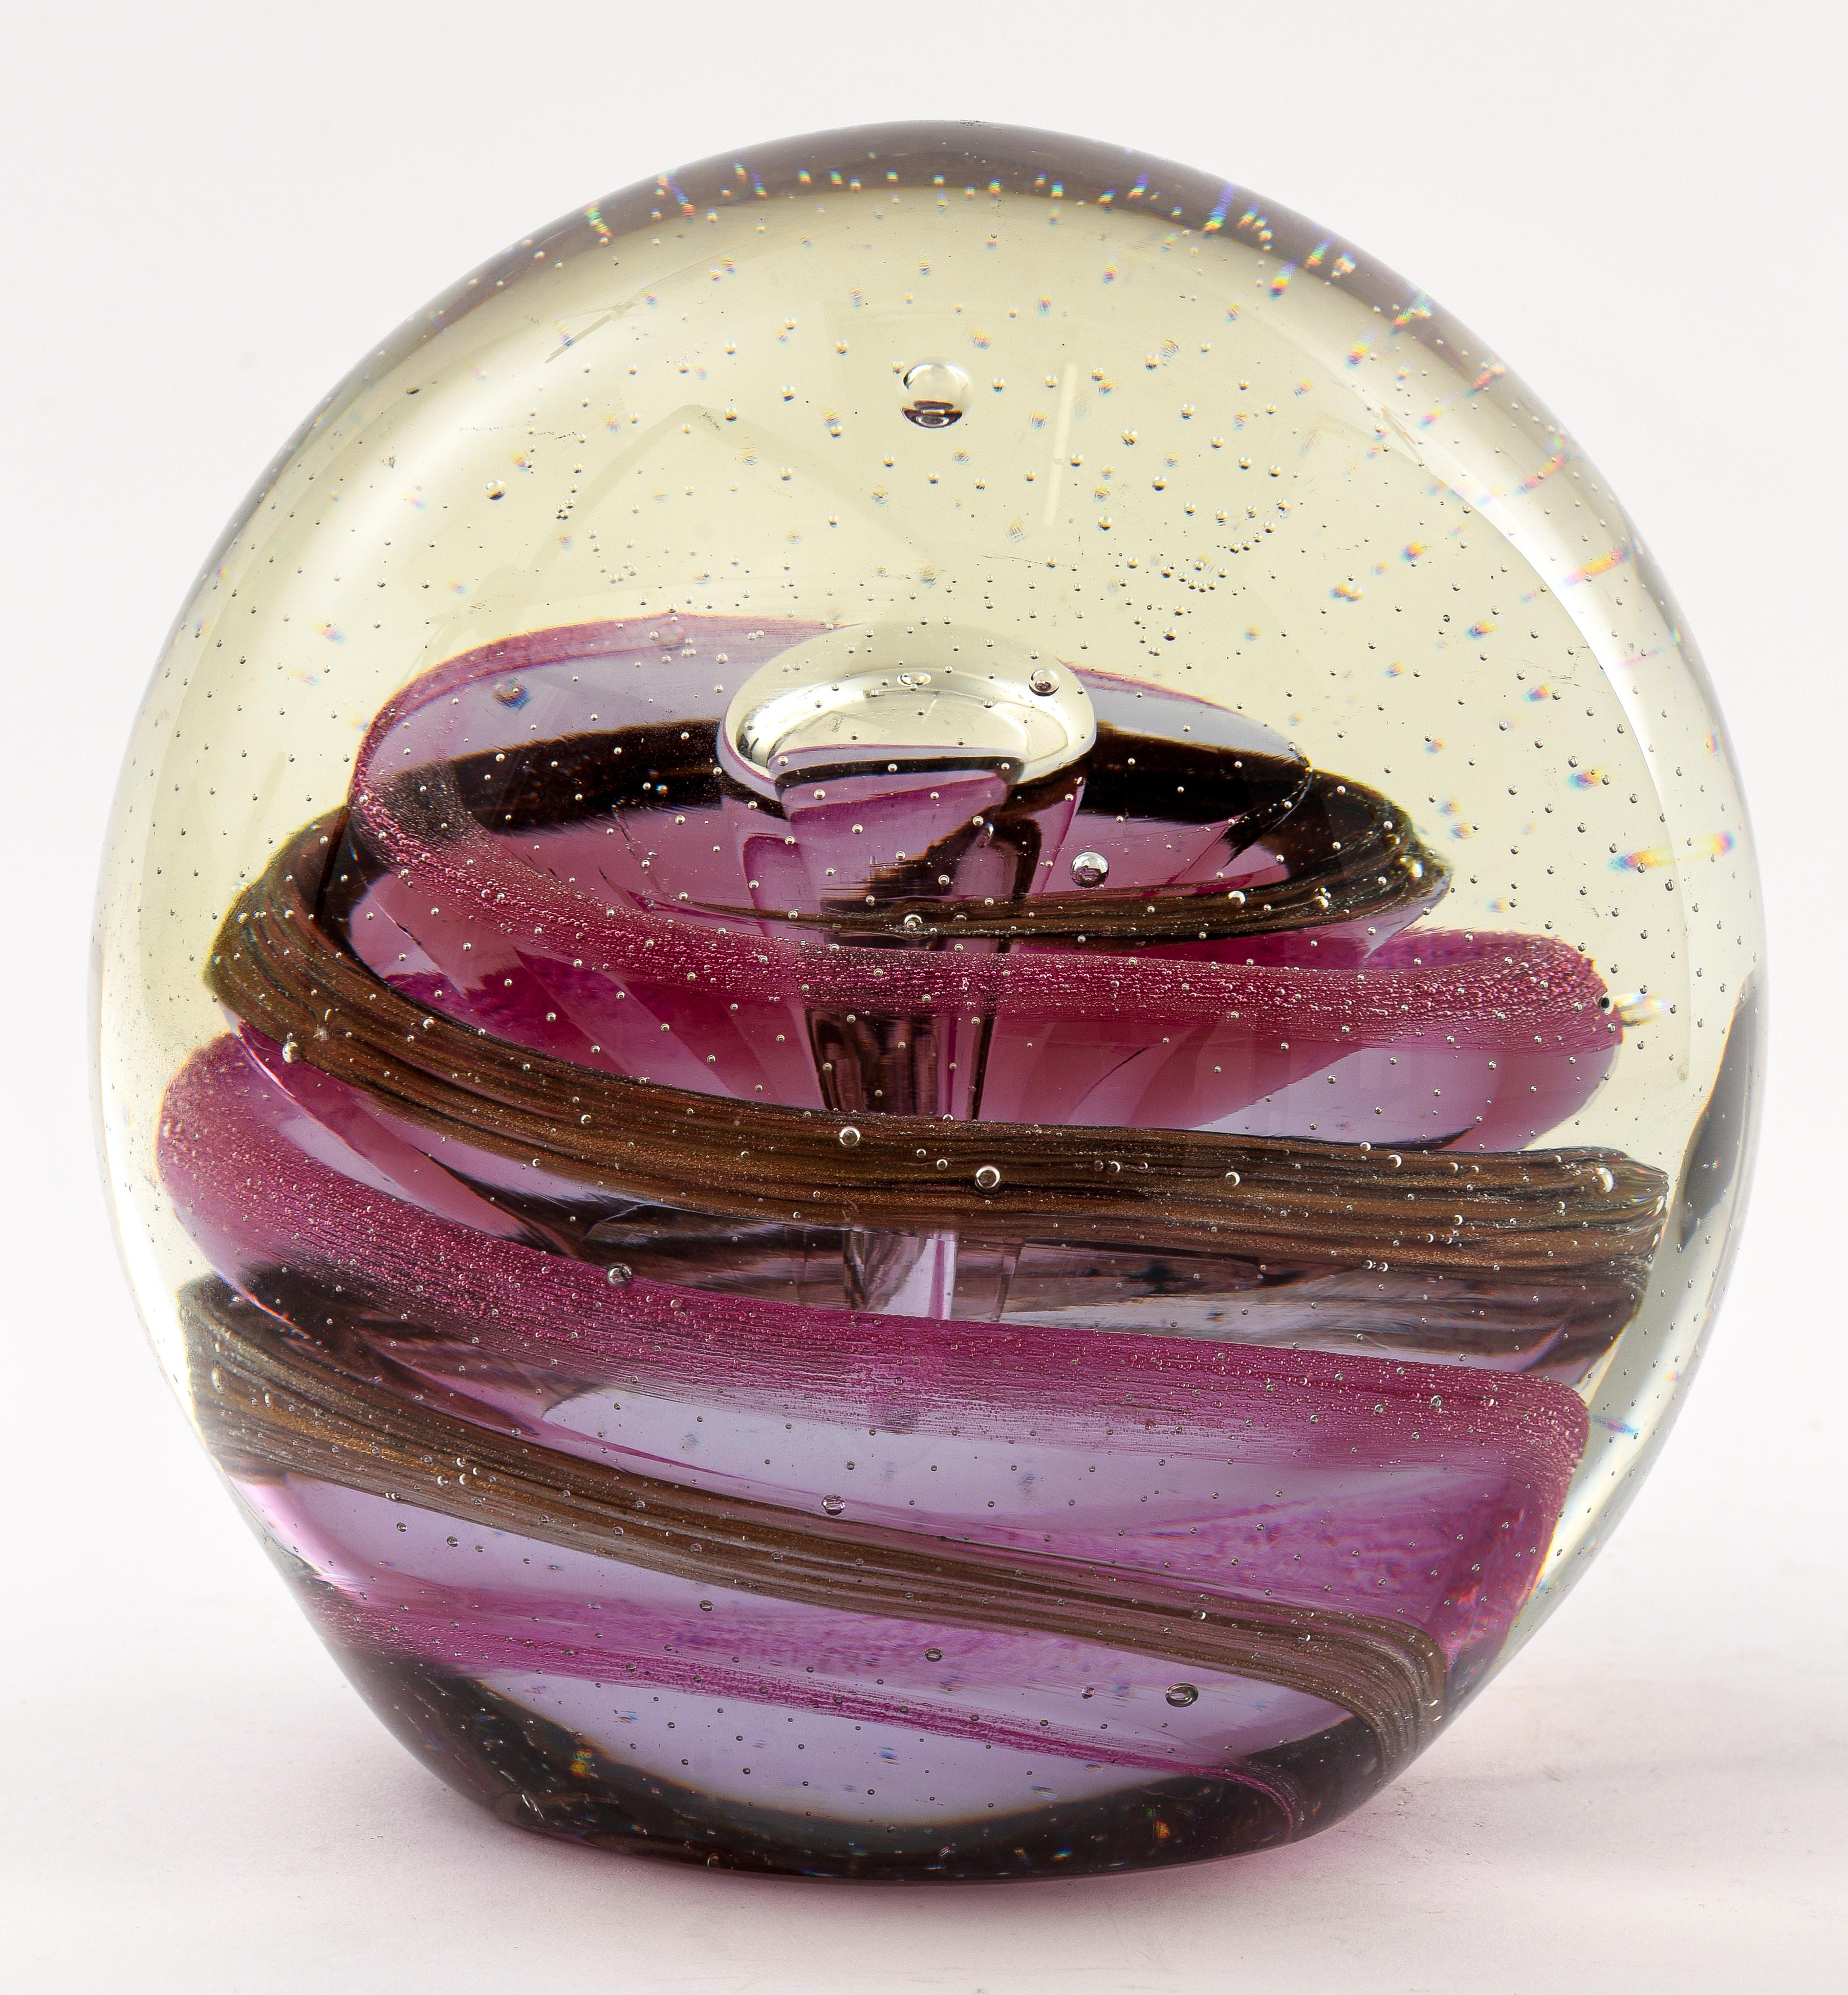 Modern large art glass studio paperweight sculpture, with encased glass in pink swirls with gold flecks and controlled bubbles. Measures: 7